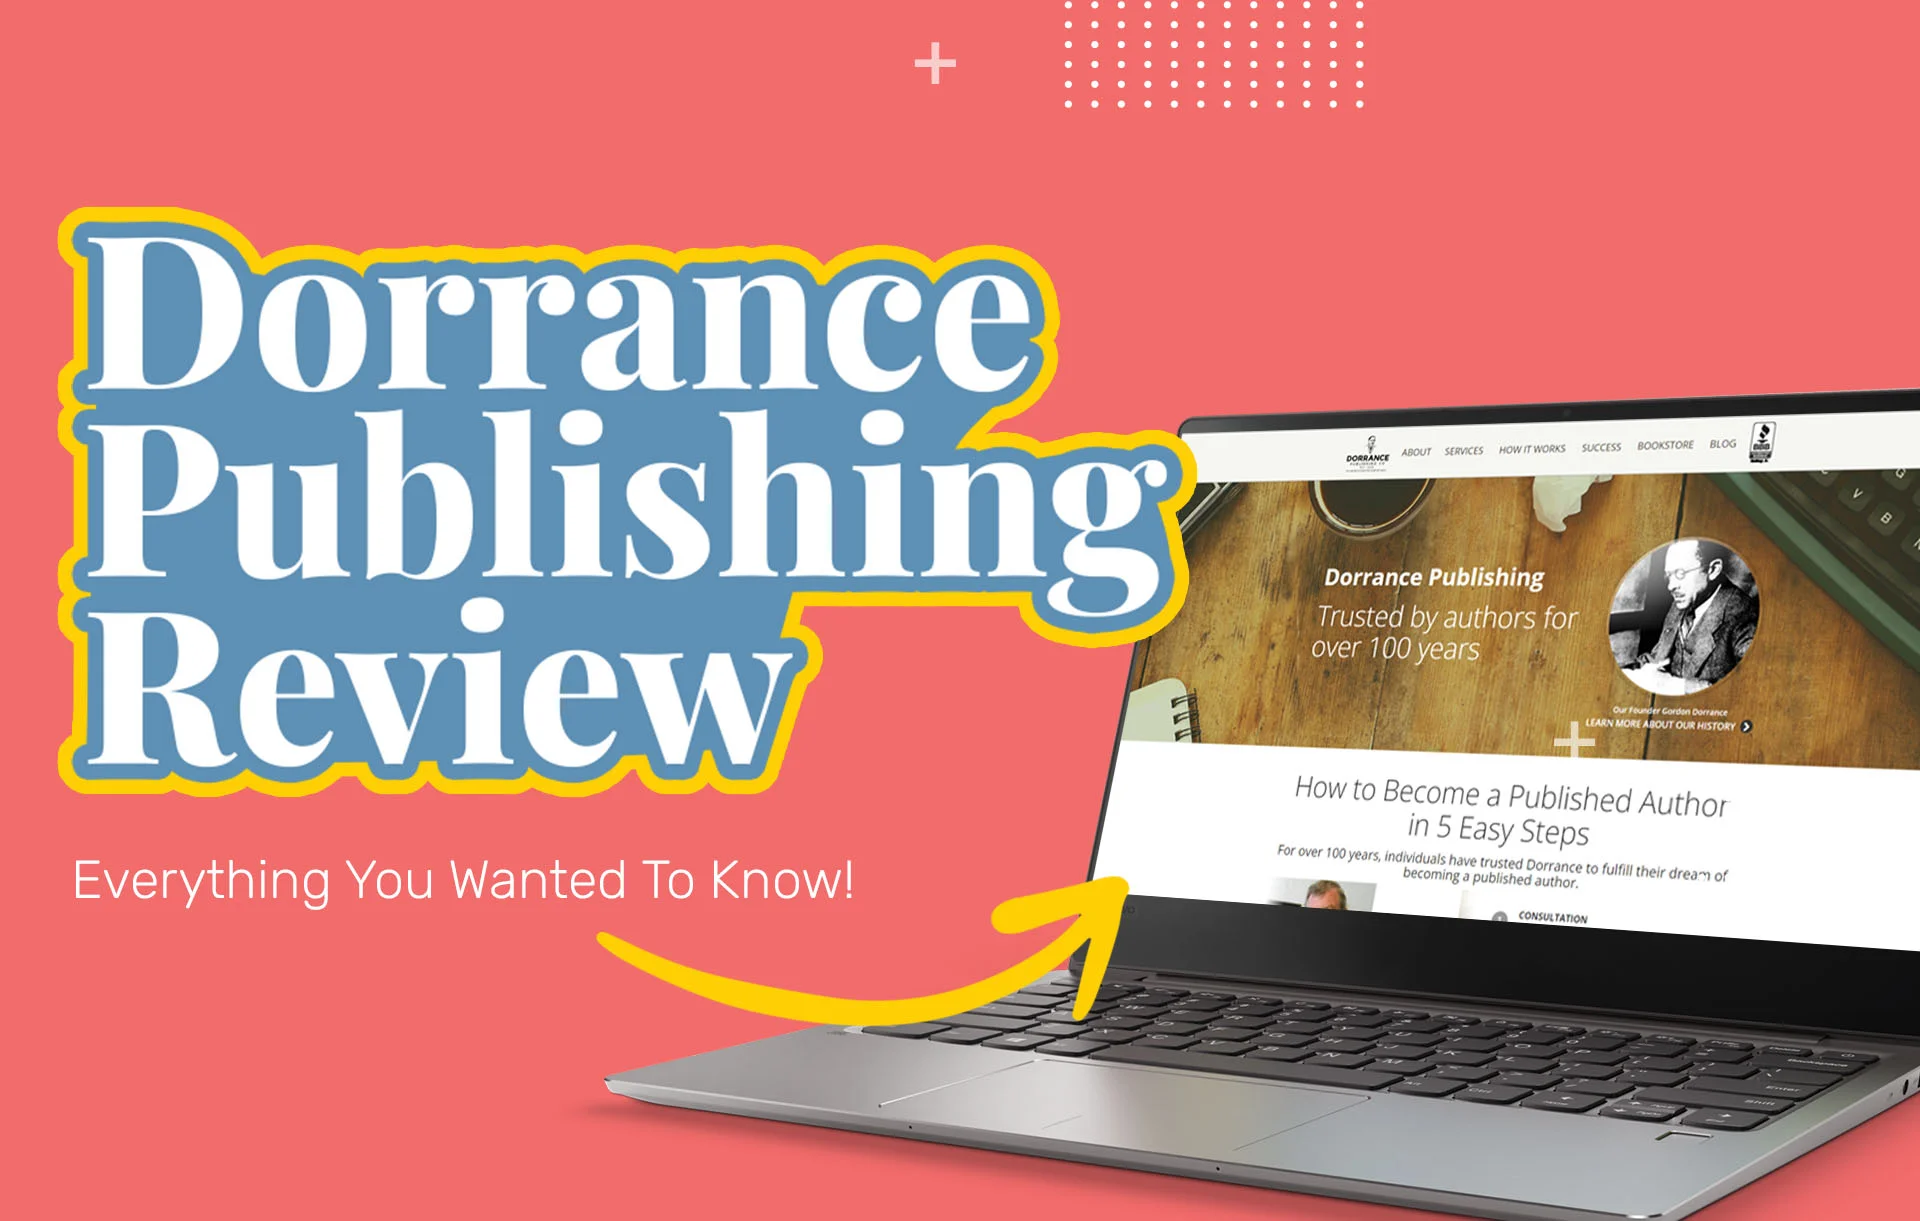 Dorrance Publishing Reviews: Everything You Wanted To Know!